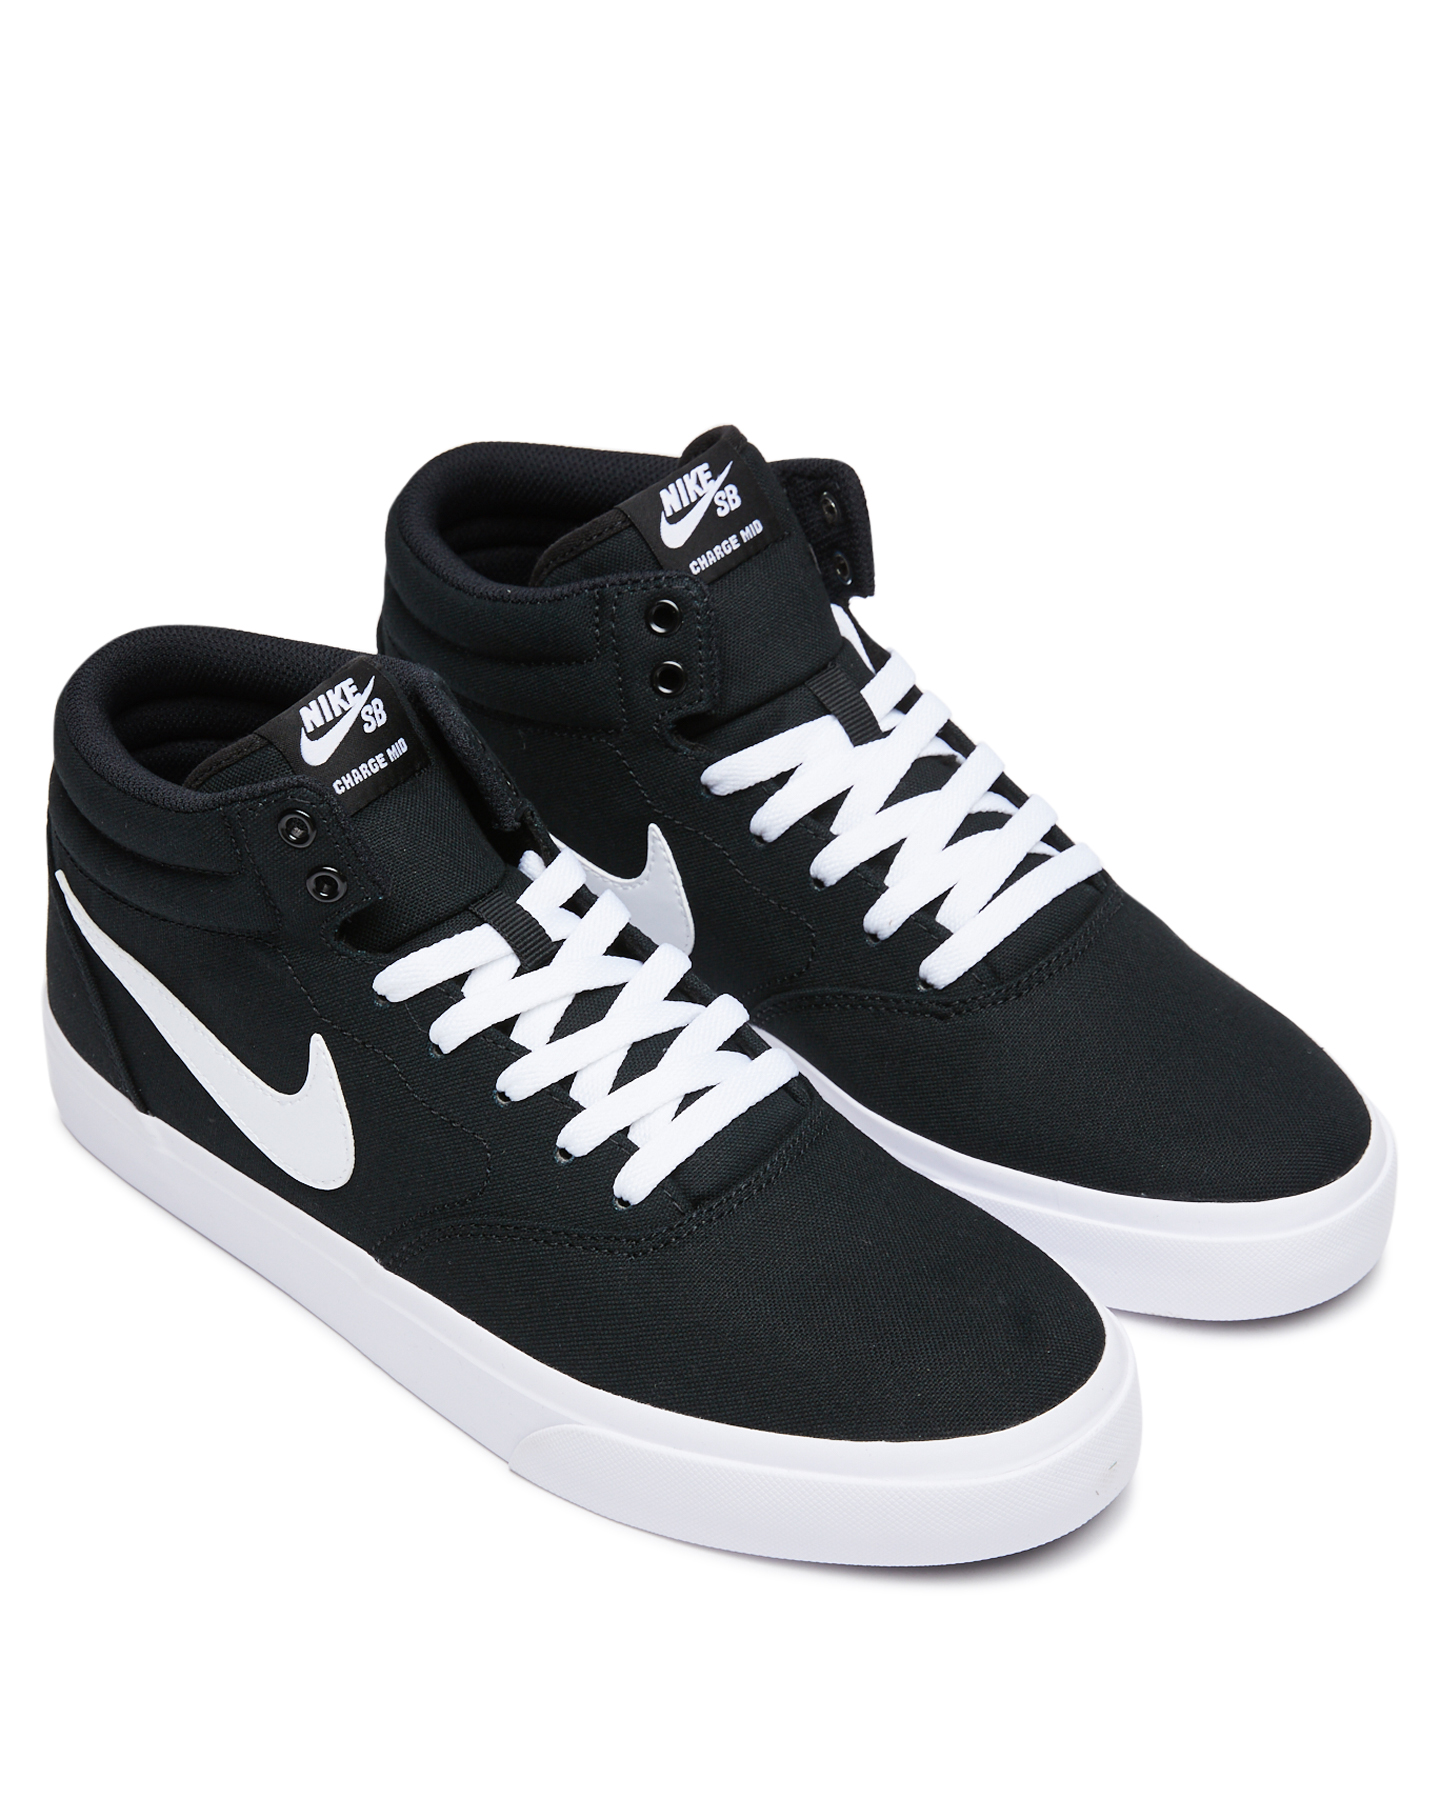 Nike Sb Charge Mid Canvas Shoe - Black | SurfStitch